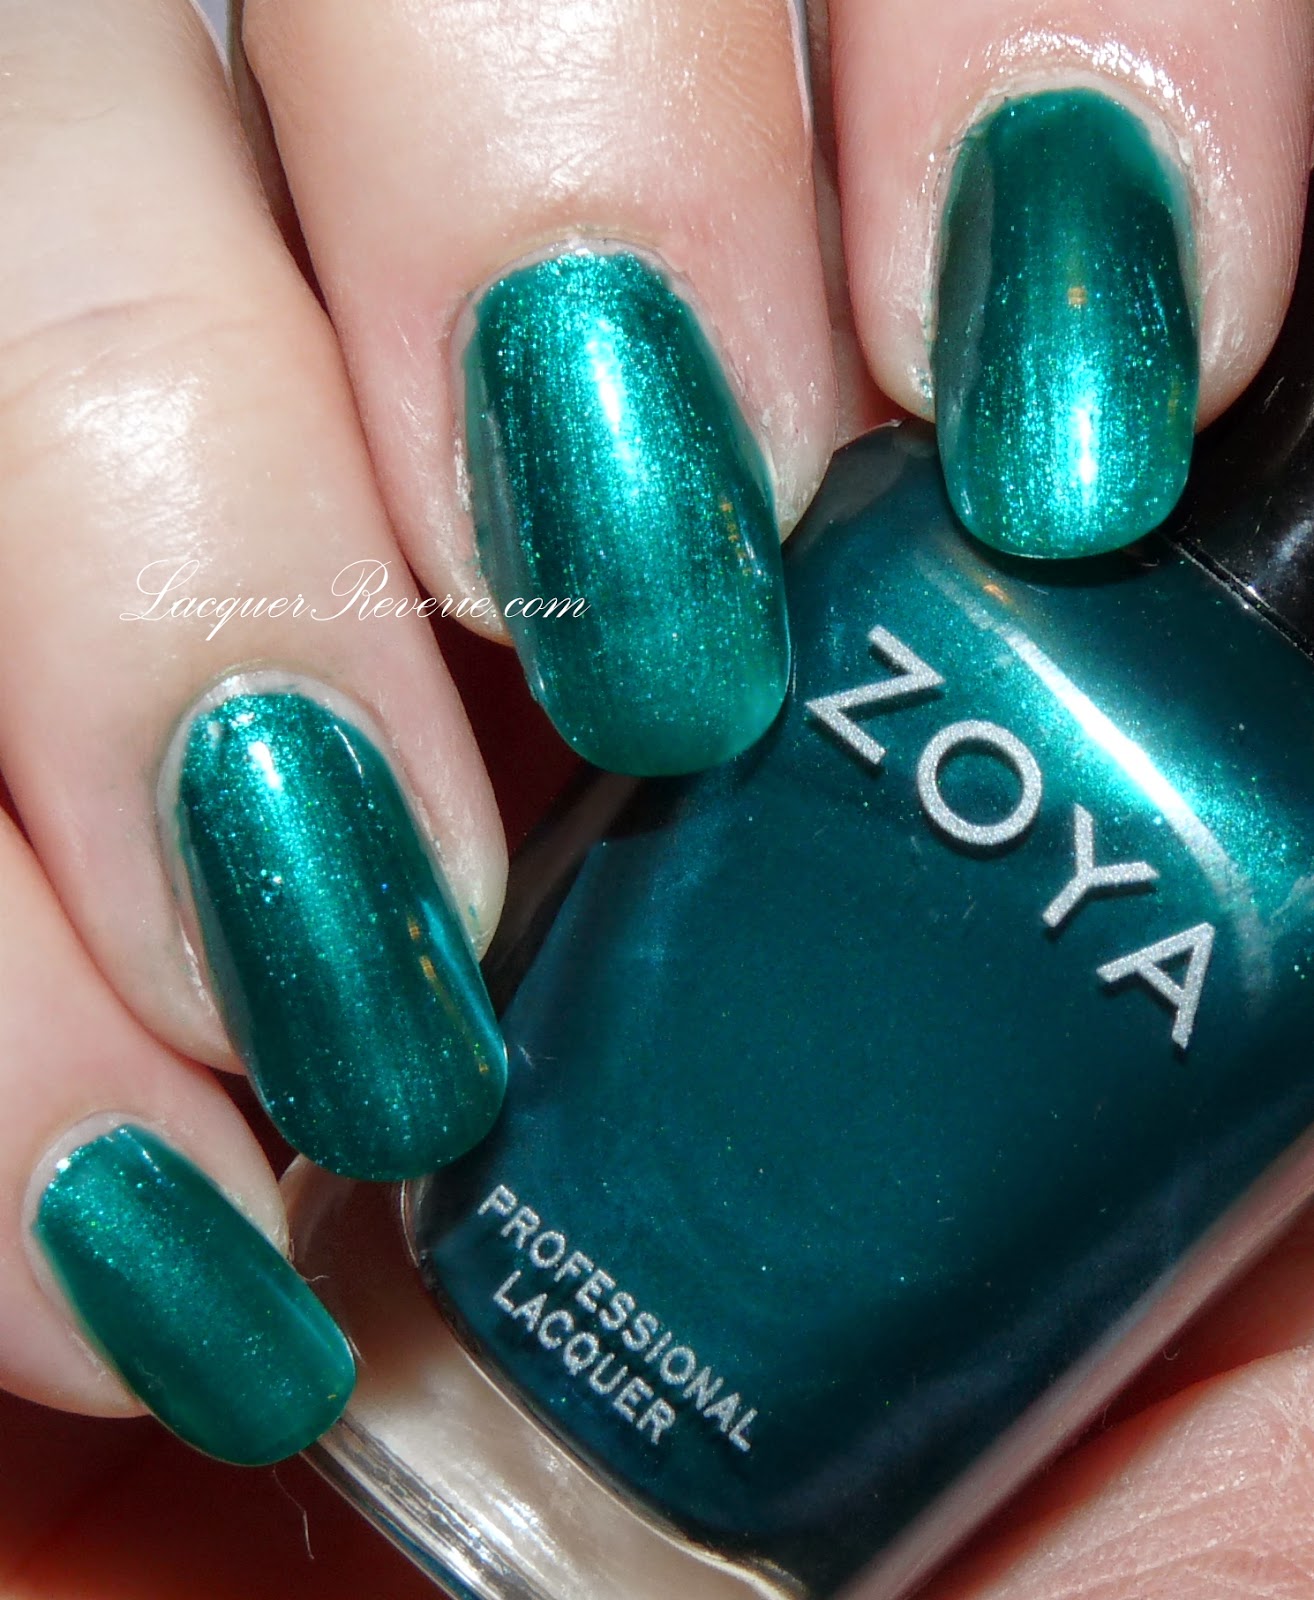 Lacquer Reverie: Emerald Greens: OPI, Ulta, and Zoya